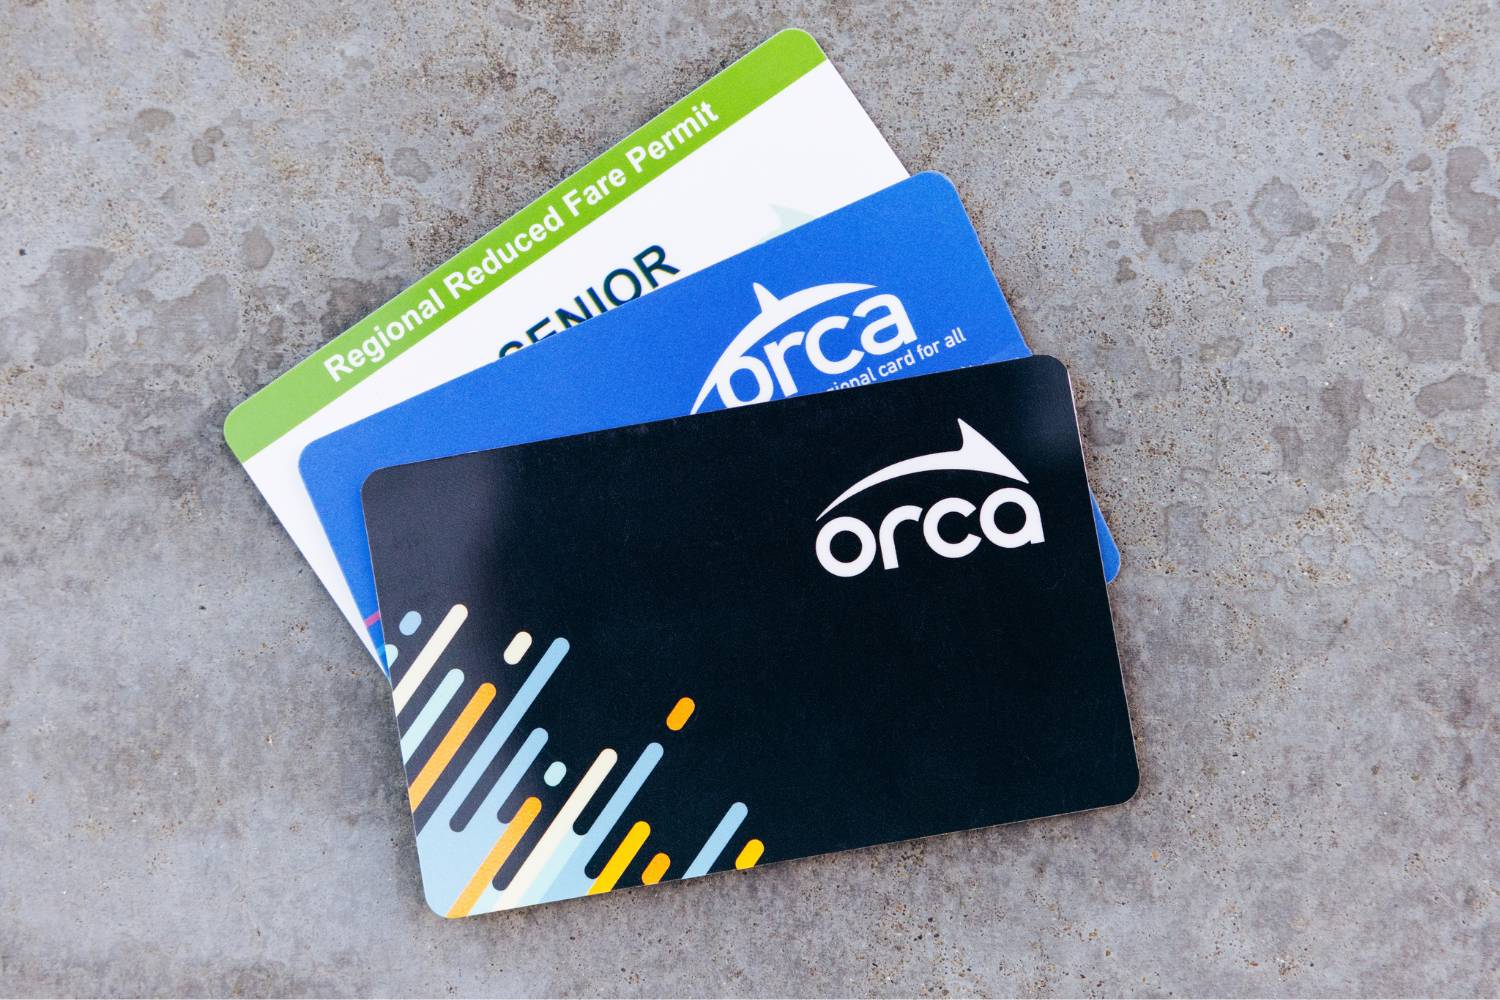 Different options for ORCA cards pictured: Next Generation, Classic and Reduced Fare Permit